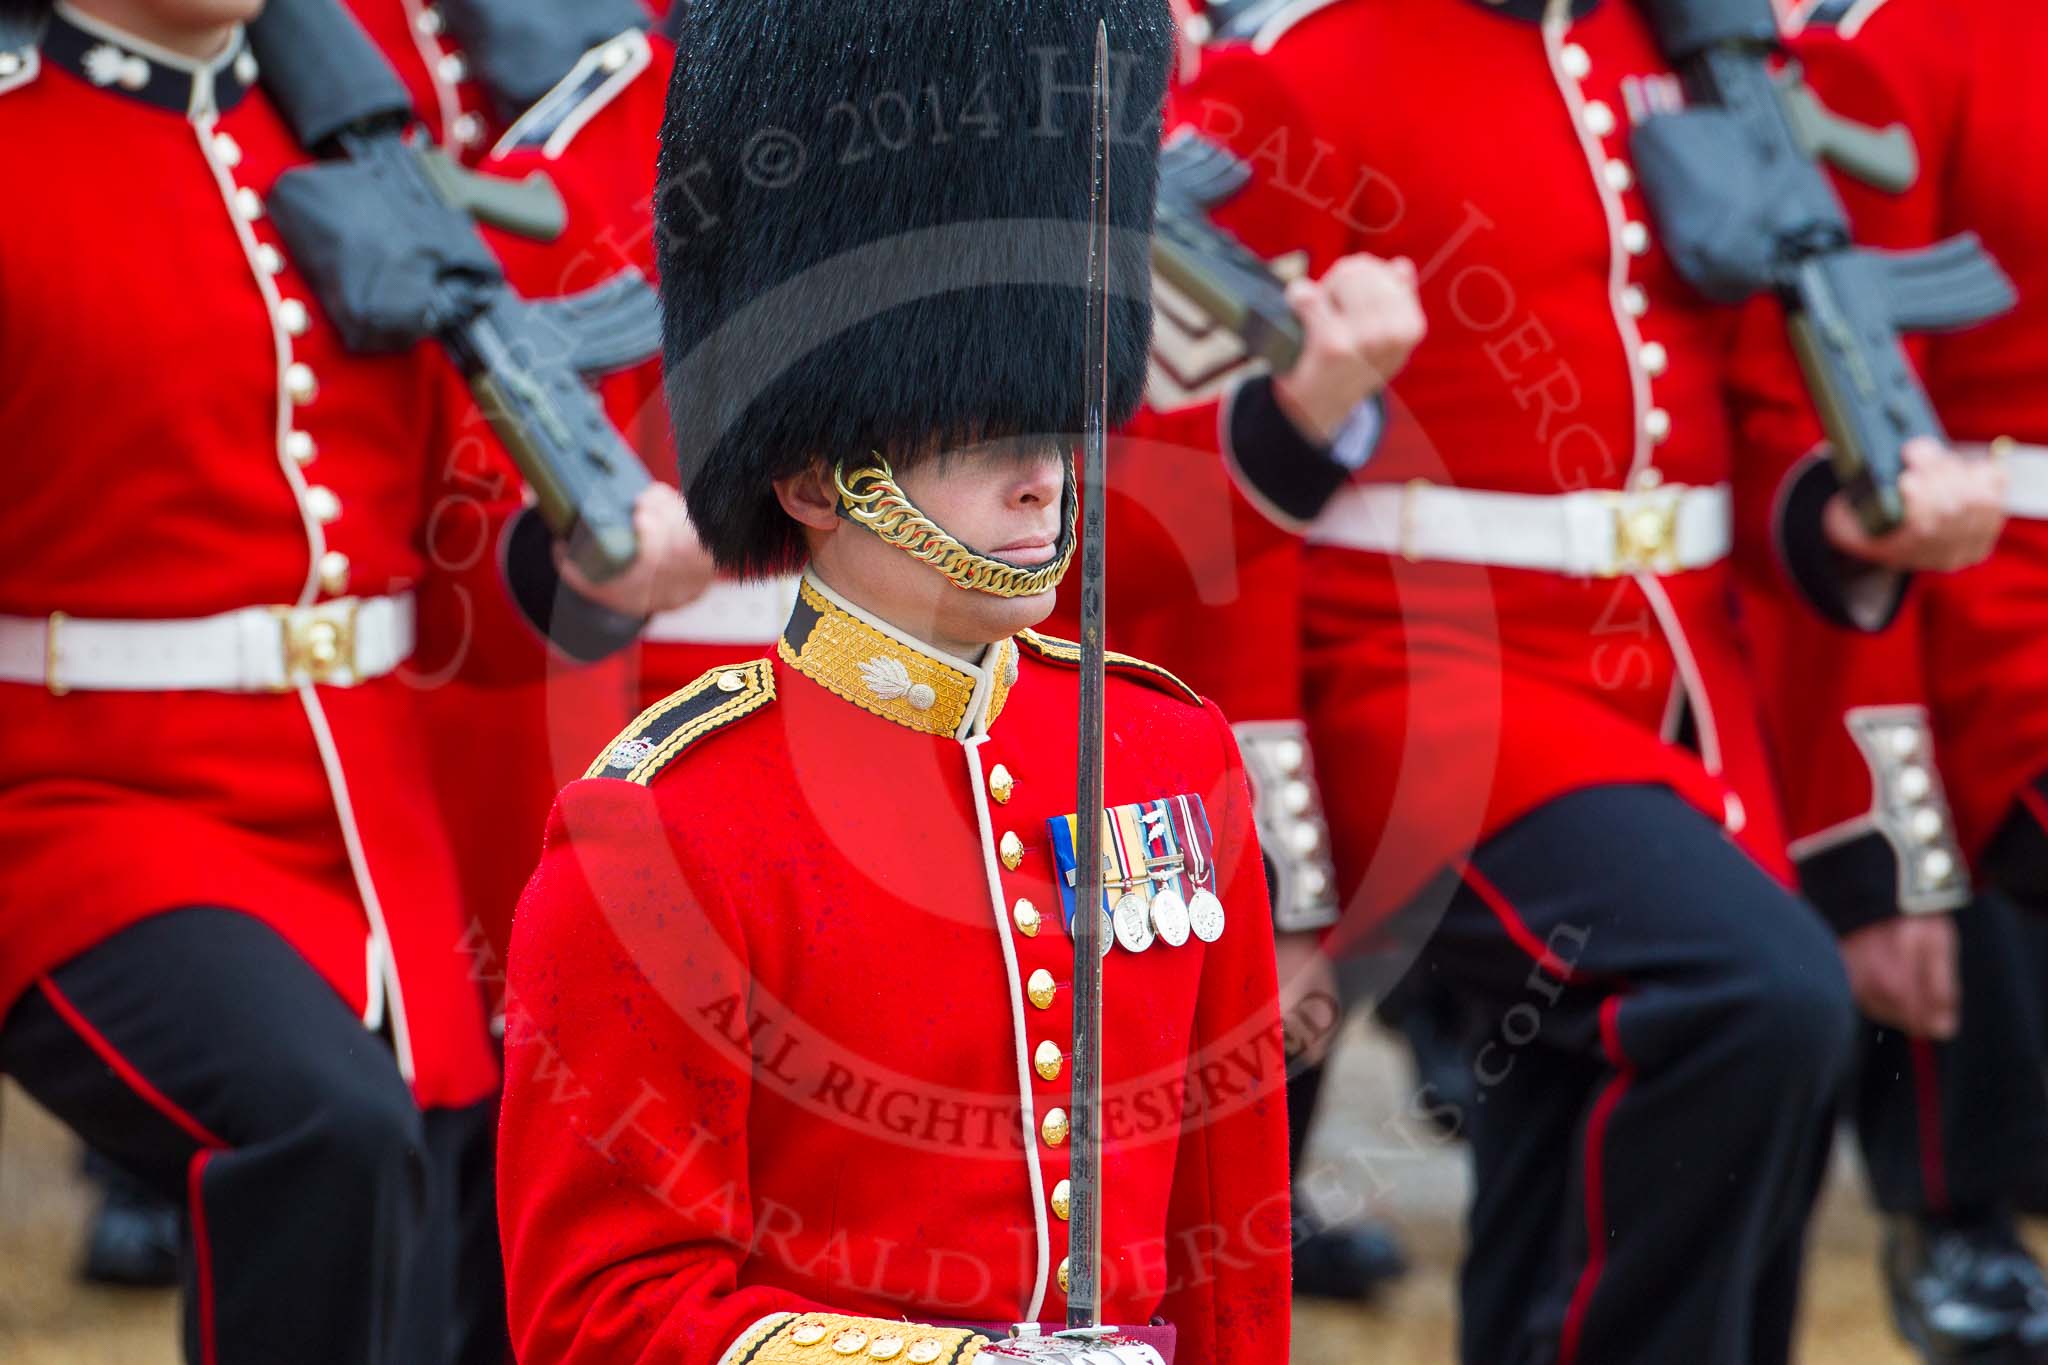 The Colonel's Review 2014.
Horse Guards Parade, Westminster,
London,

United Kingdom,
on 07 June 2014 at 11:35, image #501